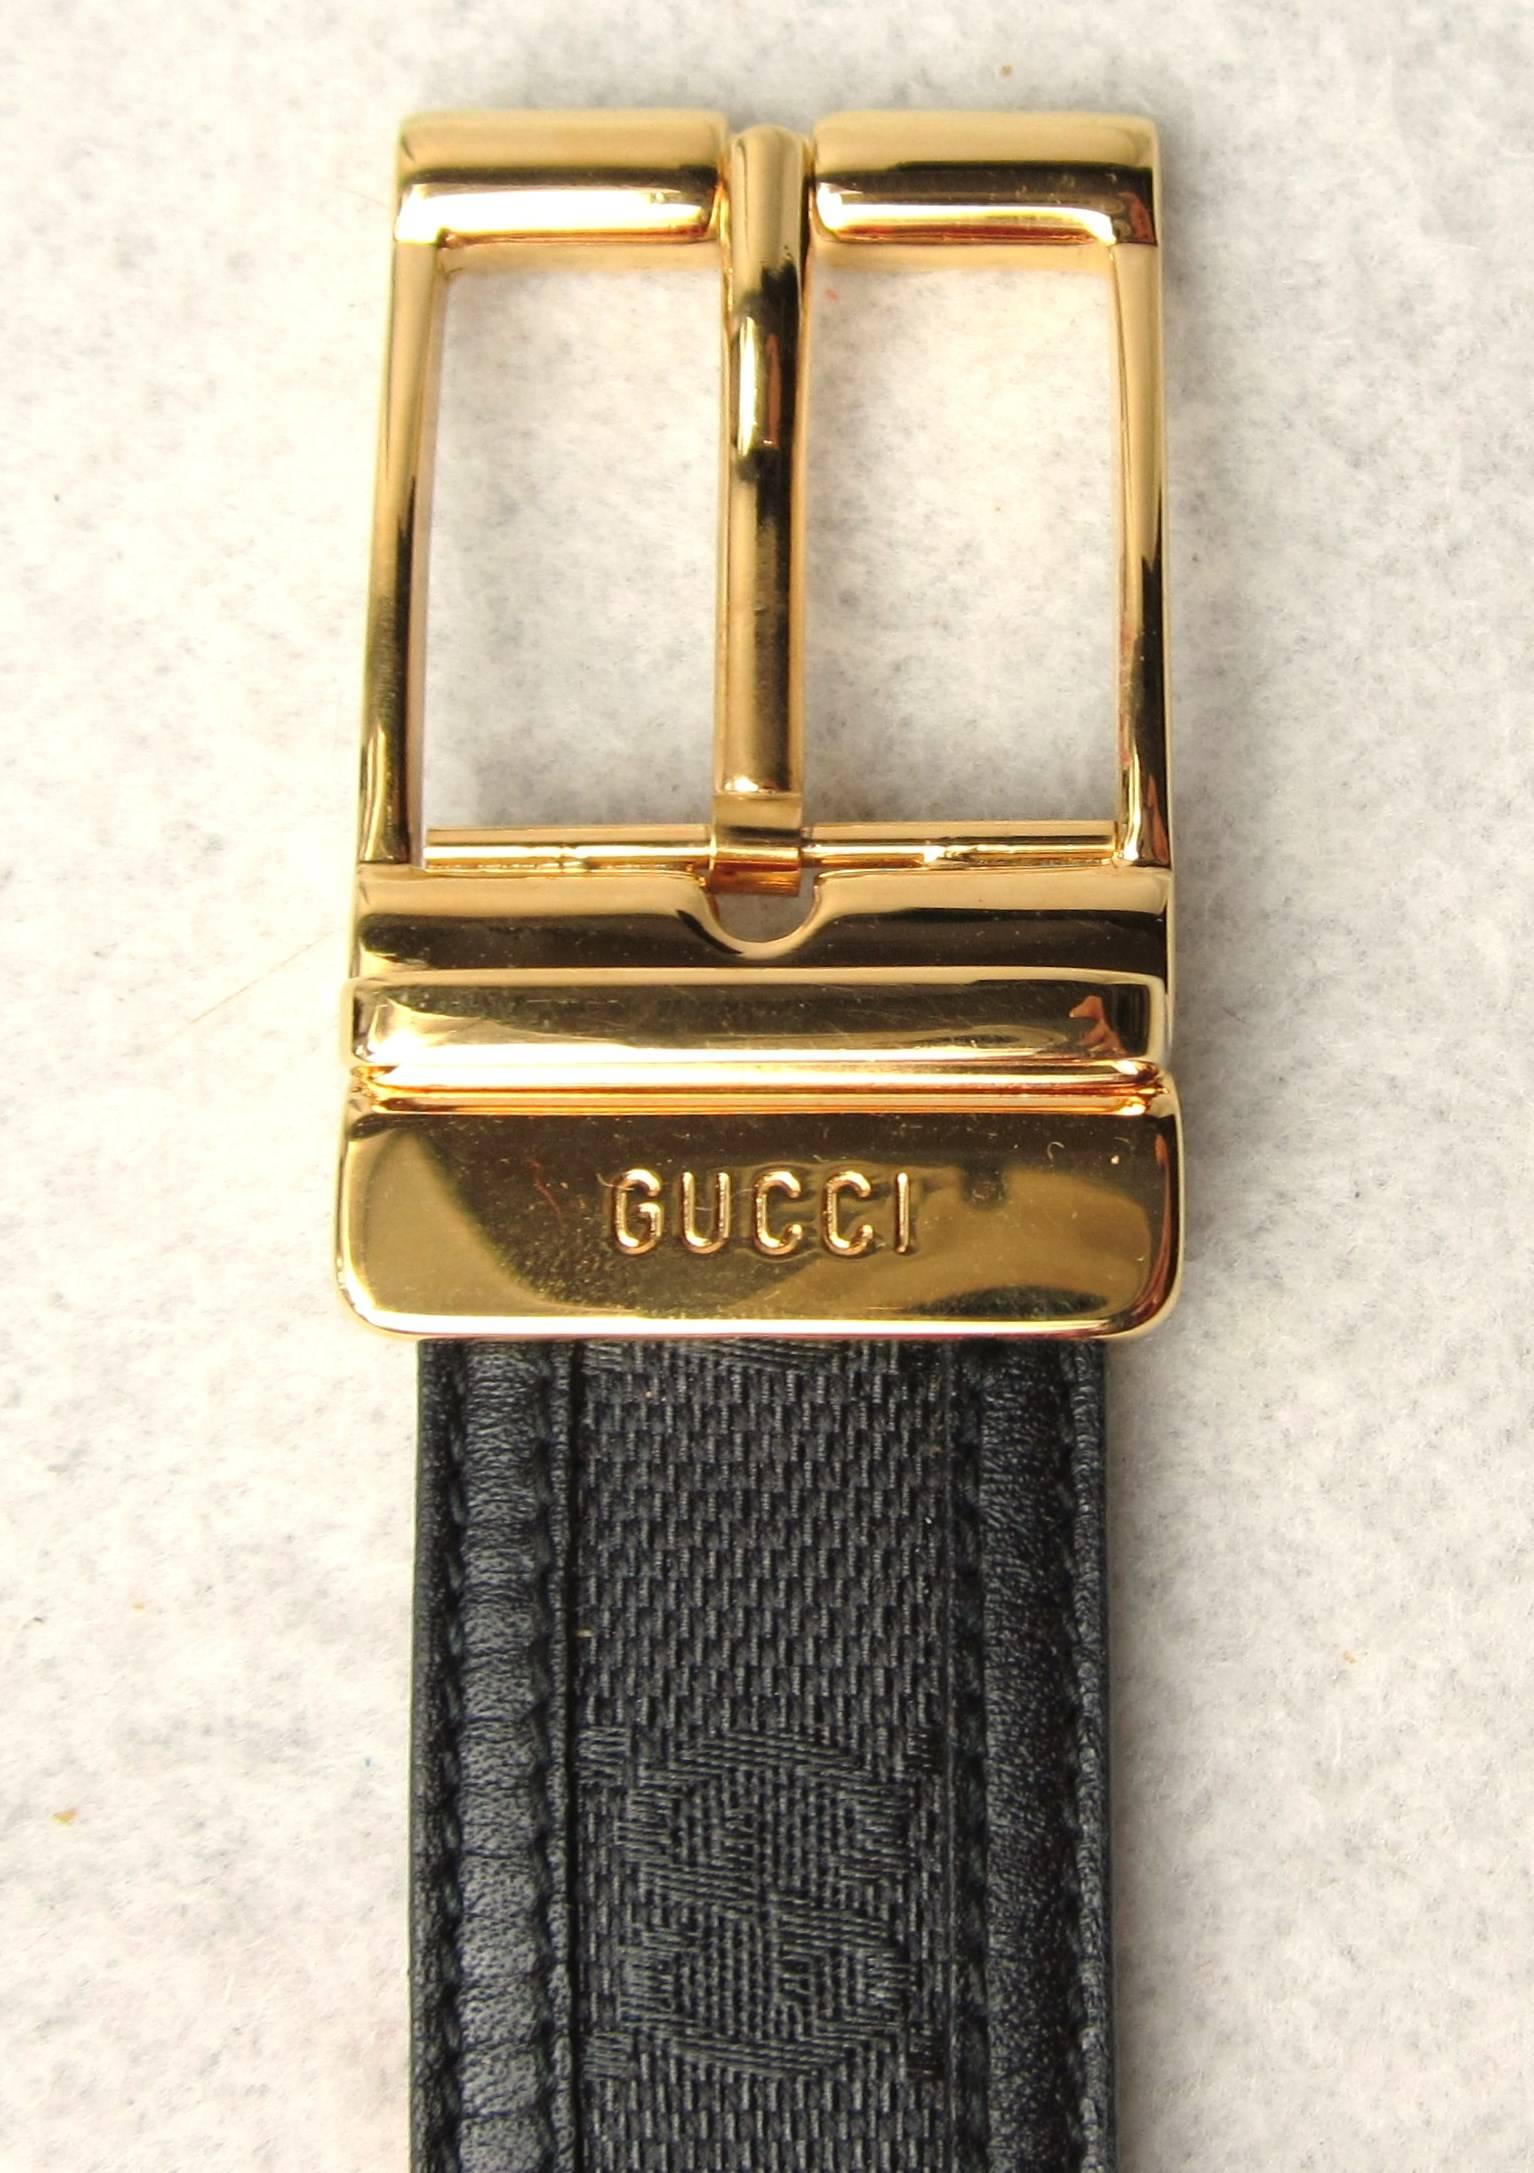 Gucci Black with Gold Tone Belt Buckle. Signature GG on the canvas with leather trim. This was purchased in the early 90s and still has the tag on it. Labeled a size 44 - Measures 1.15 inches wide. First belt hole is at 41 inches and the belt is 47